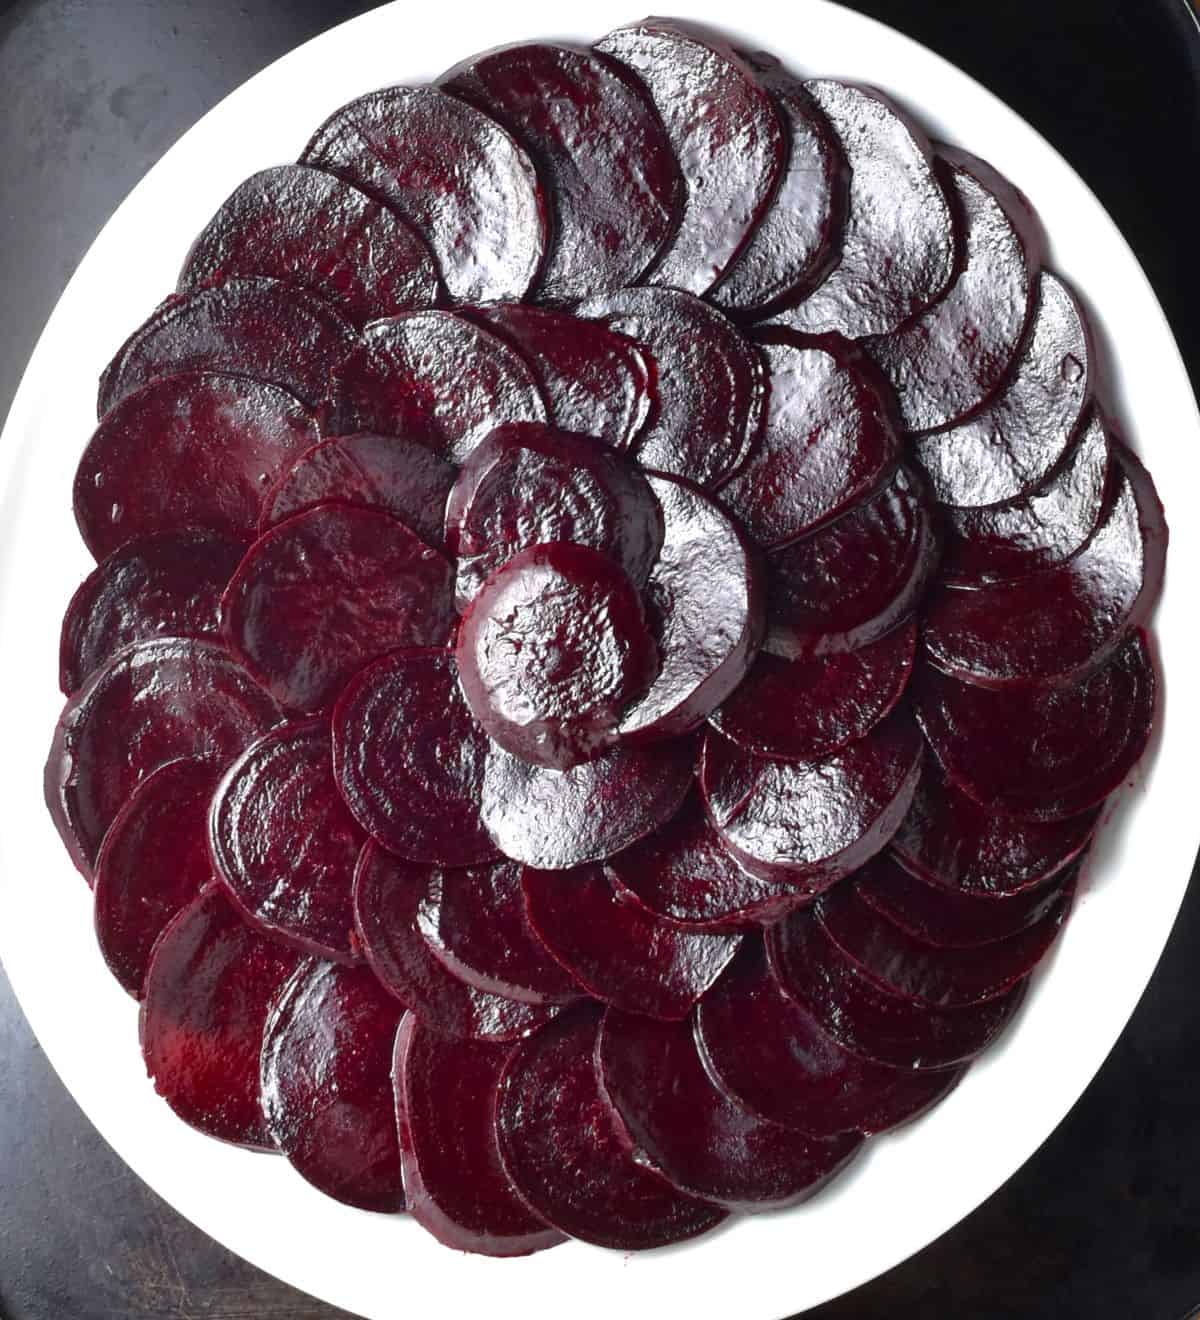 Sliced beets arranged in single layer on white plate.